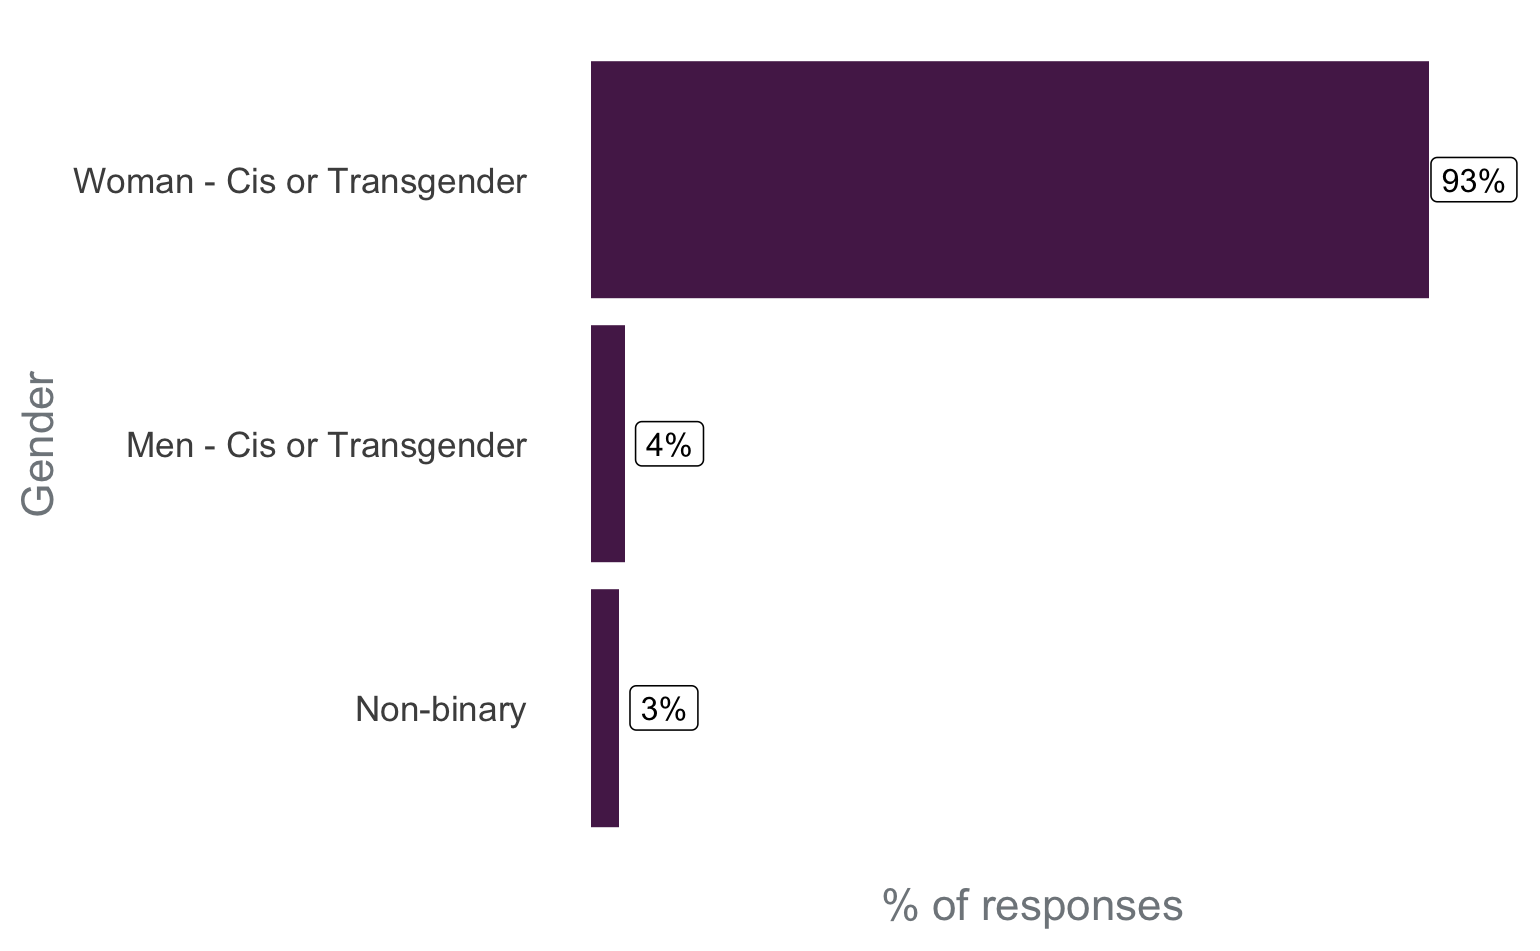 Bar chart where the X axis shows the percentage of respondents of the survey, and the Y axis represents the gender. Around 93% of the respondents said that they are a cis or transgender woman; around 3% said they are a cis or transgender men; and around 3% said that they are non-binary.